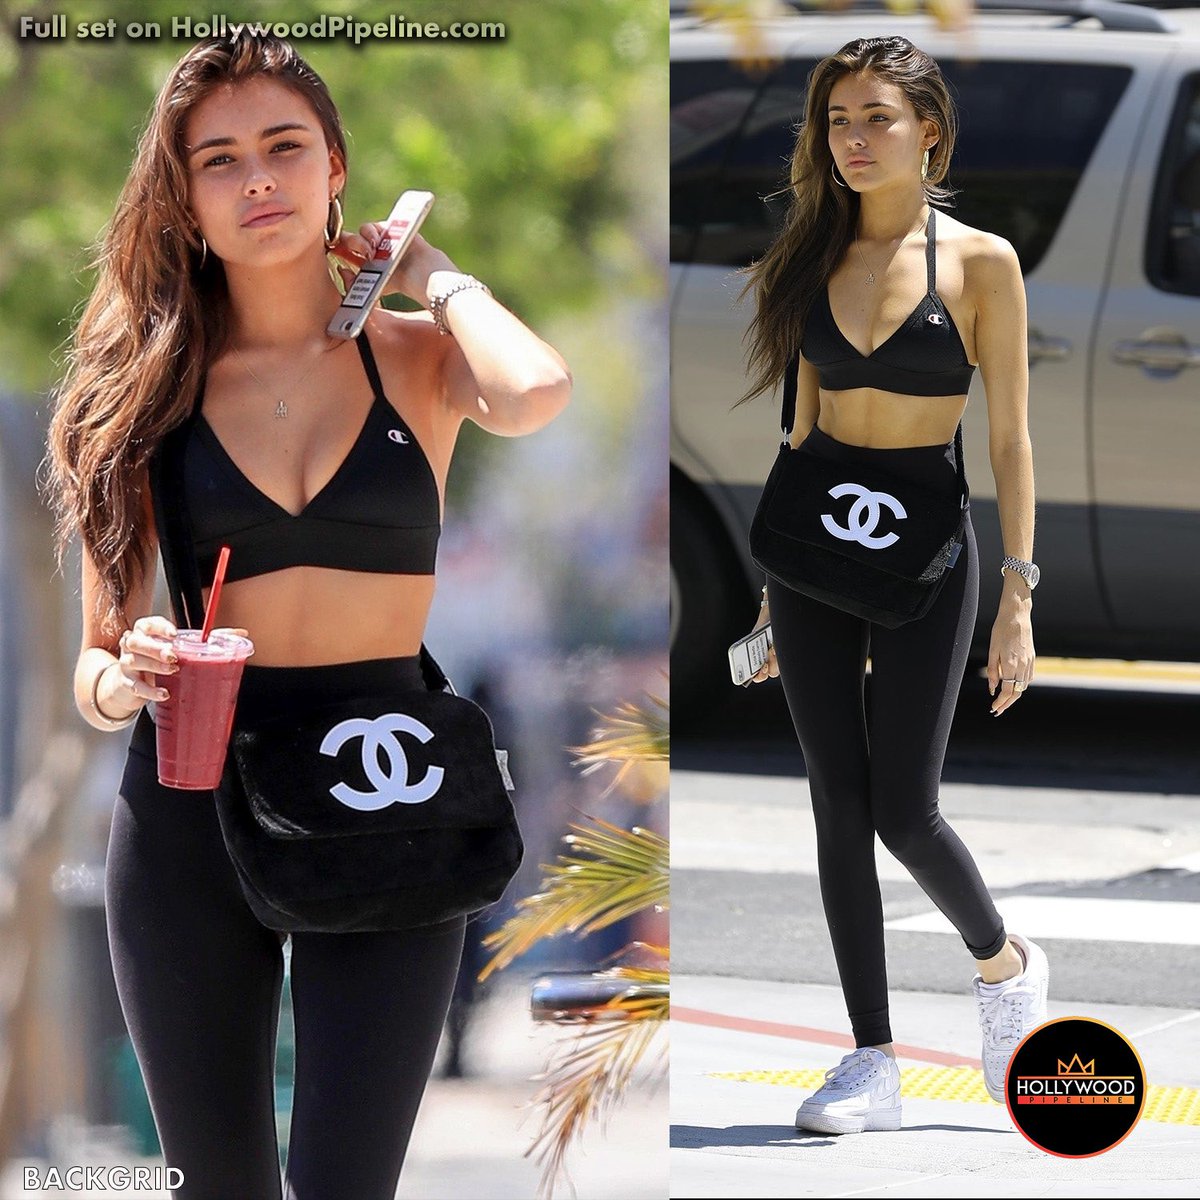 Hollywood Pipeline on X: Makeup-Free Madison Beer Looks Chic In Chanel -  the singer is about to release new music and we are totally here for it!  @madisonbeer WE GOT LOTS MORE!